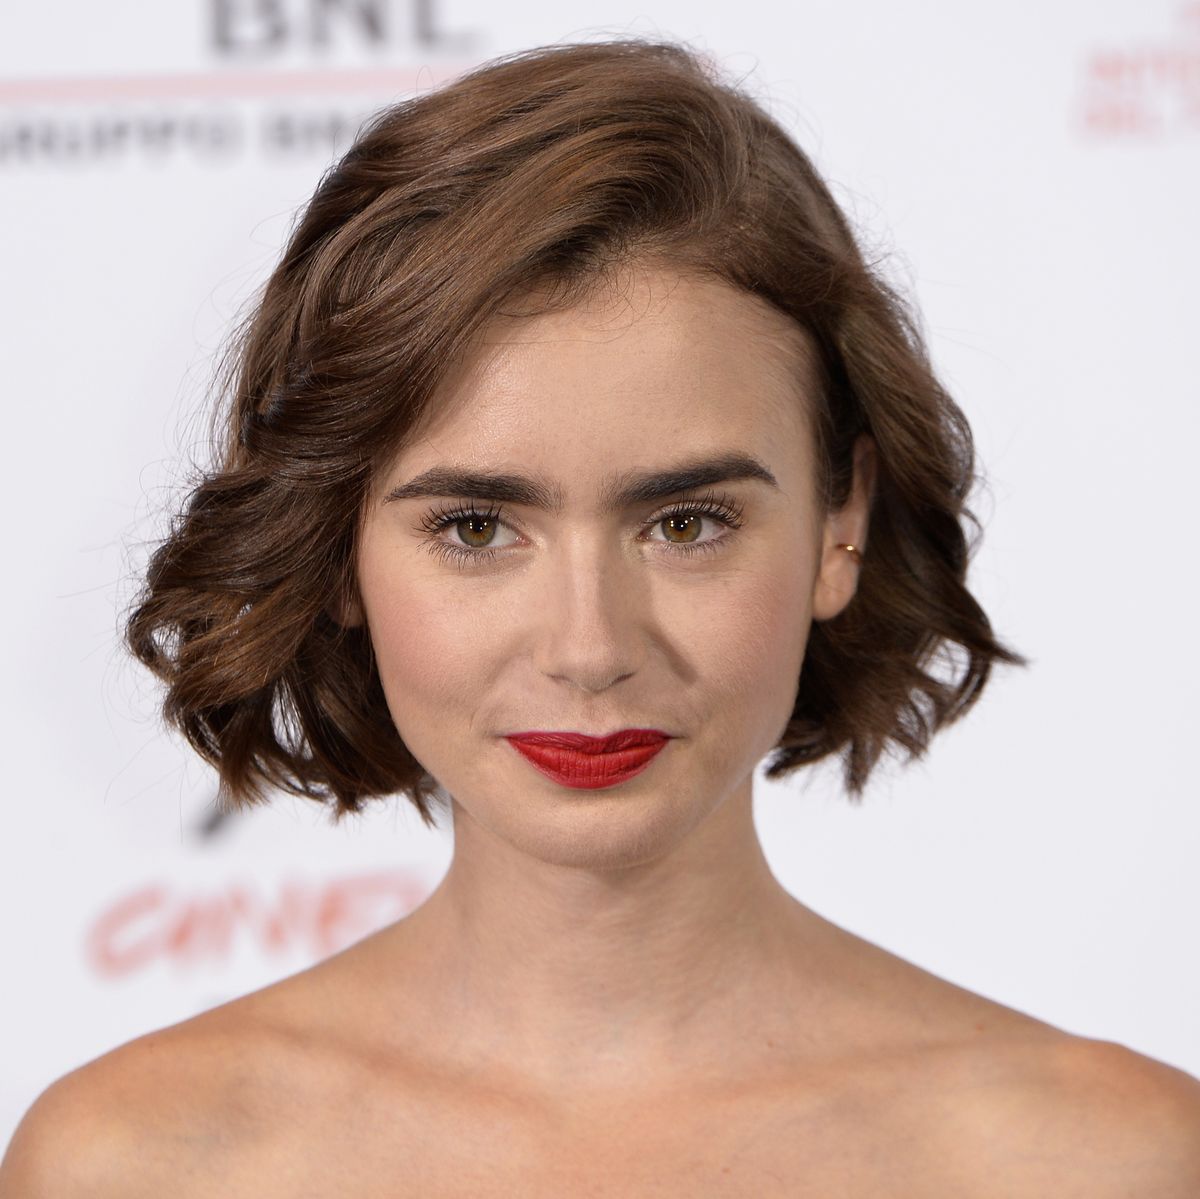 Lily Collins debuts 'mullet bangs' haircut and it's very 60s